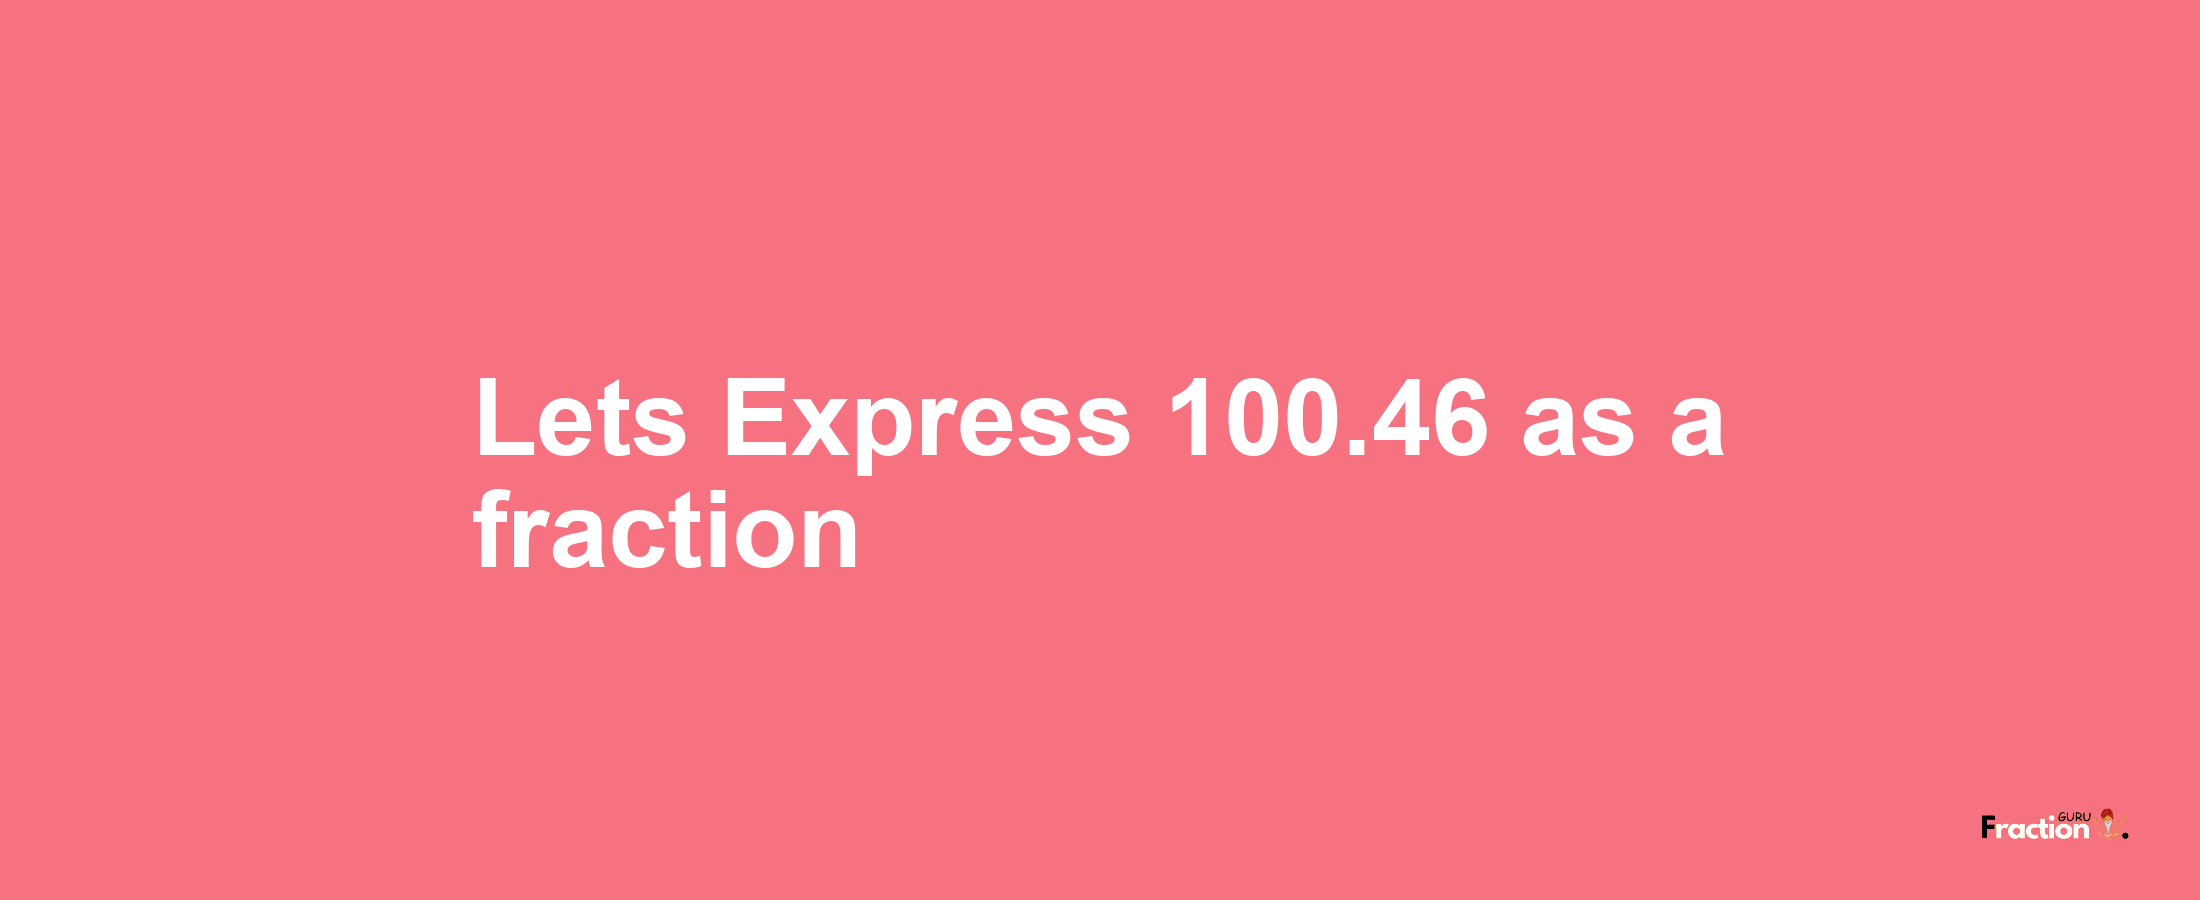 Lets Express 100.46 as afraction